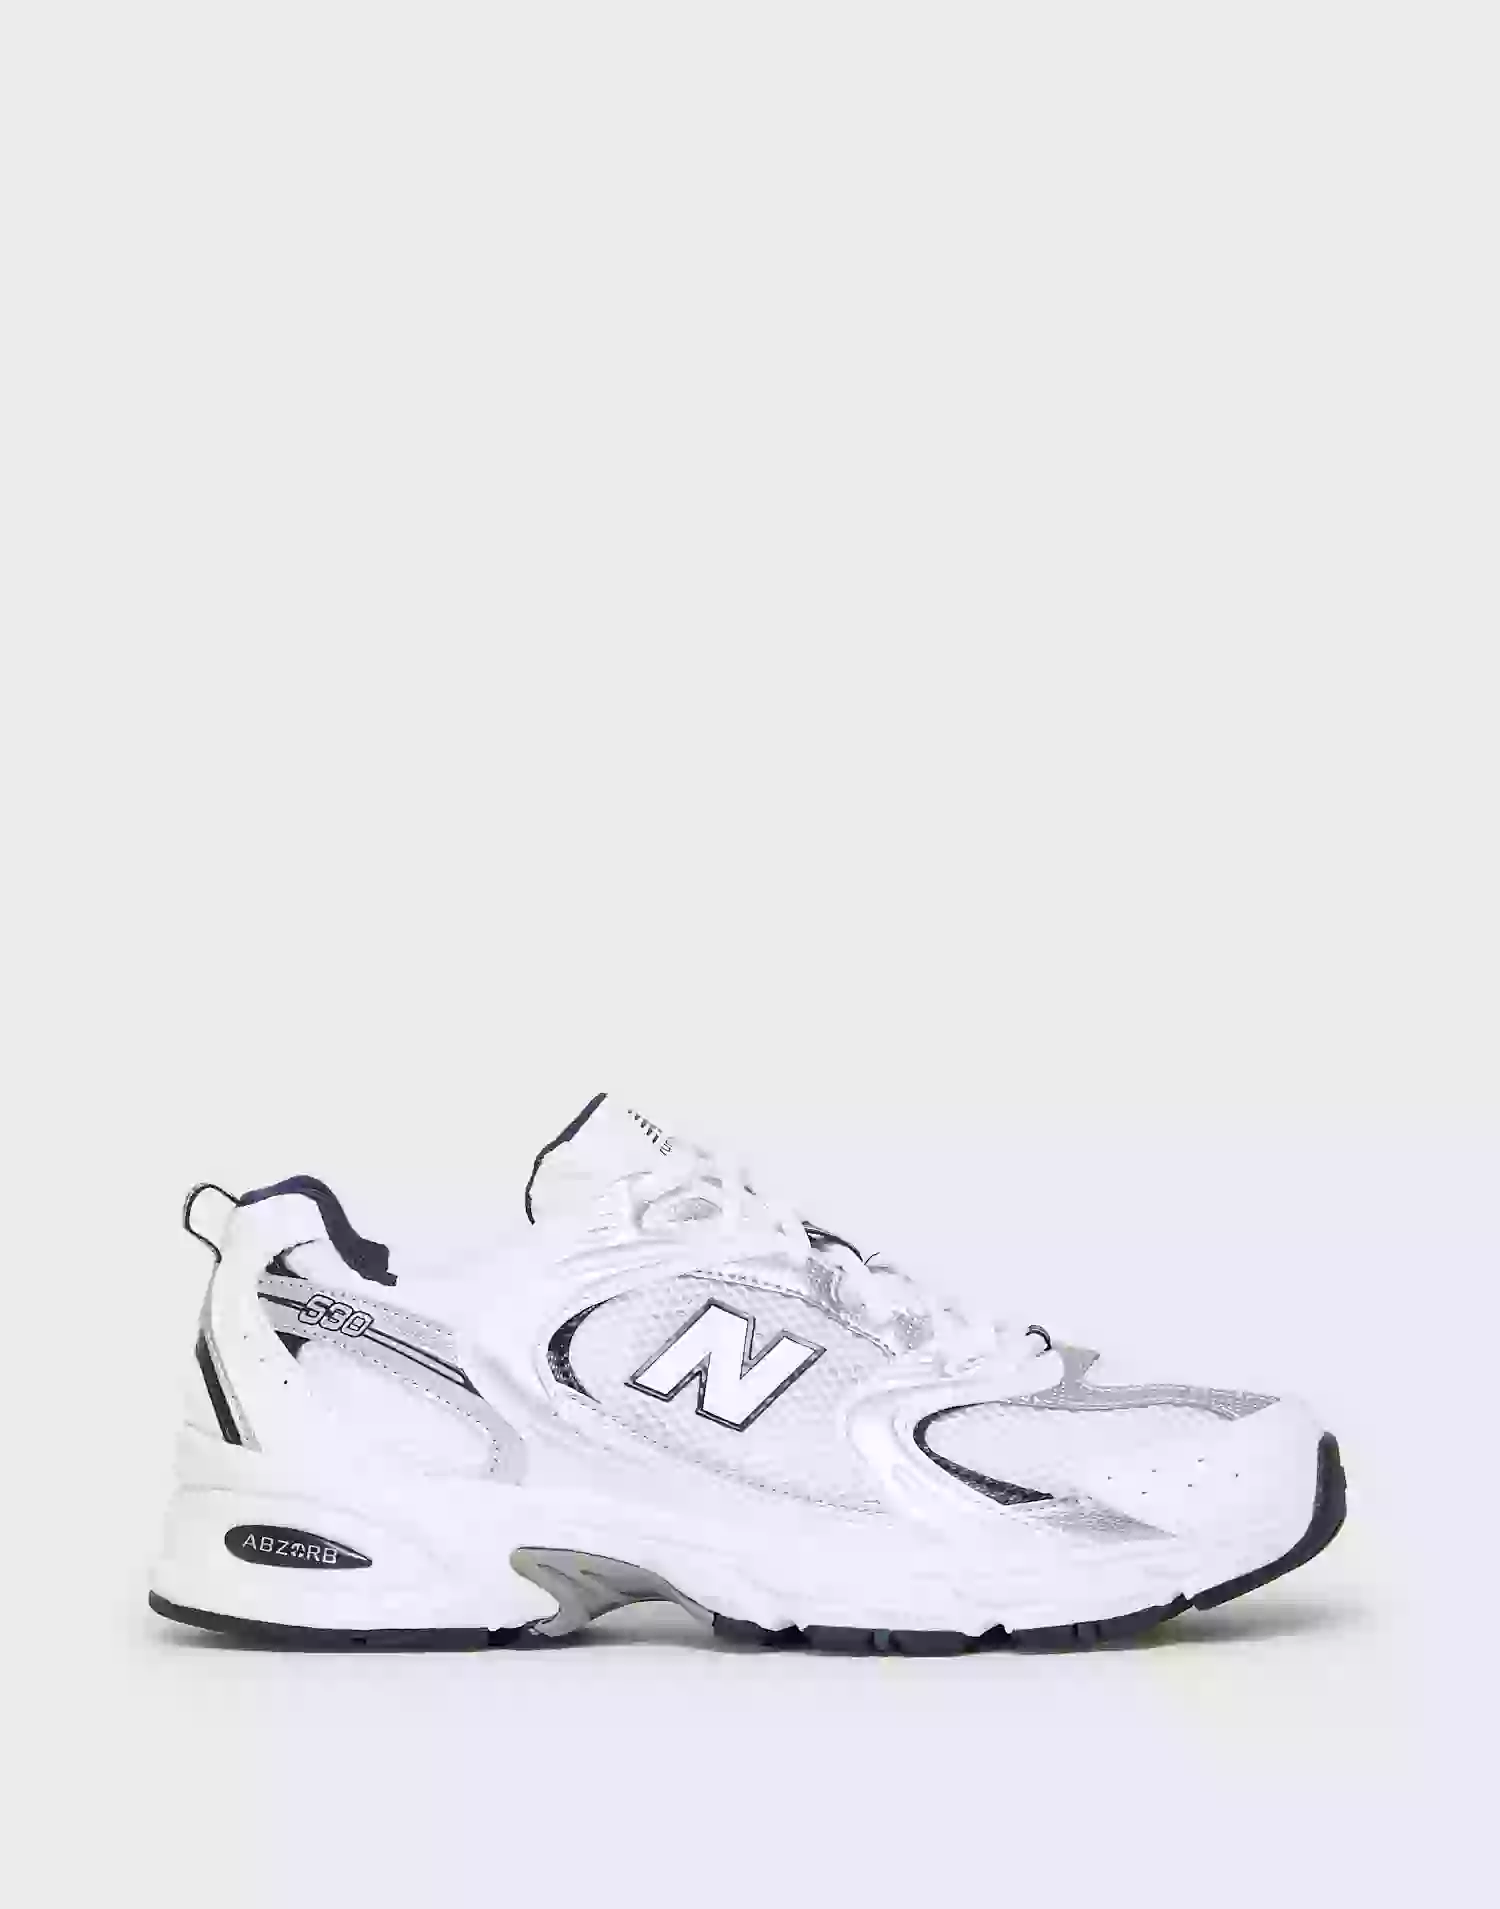 New Balance MR530SG Shoe Sneakers White